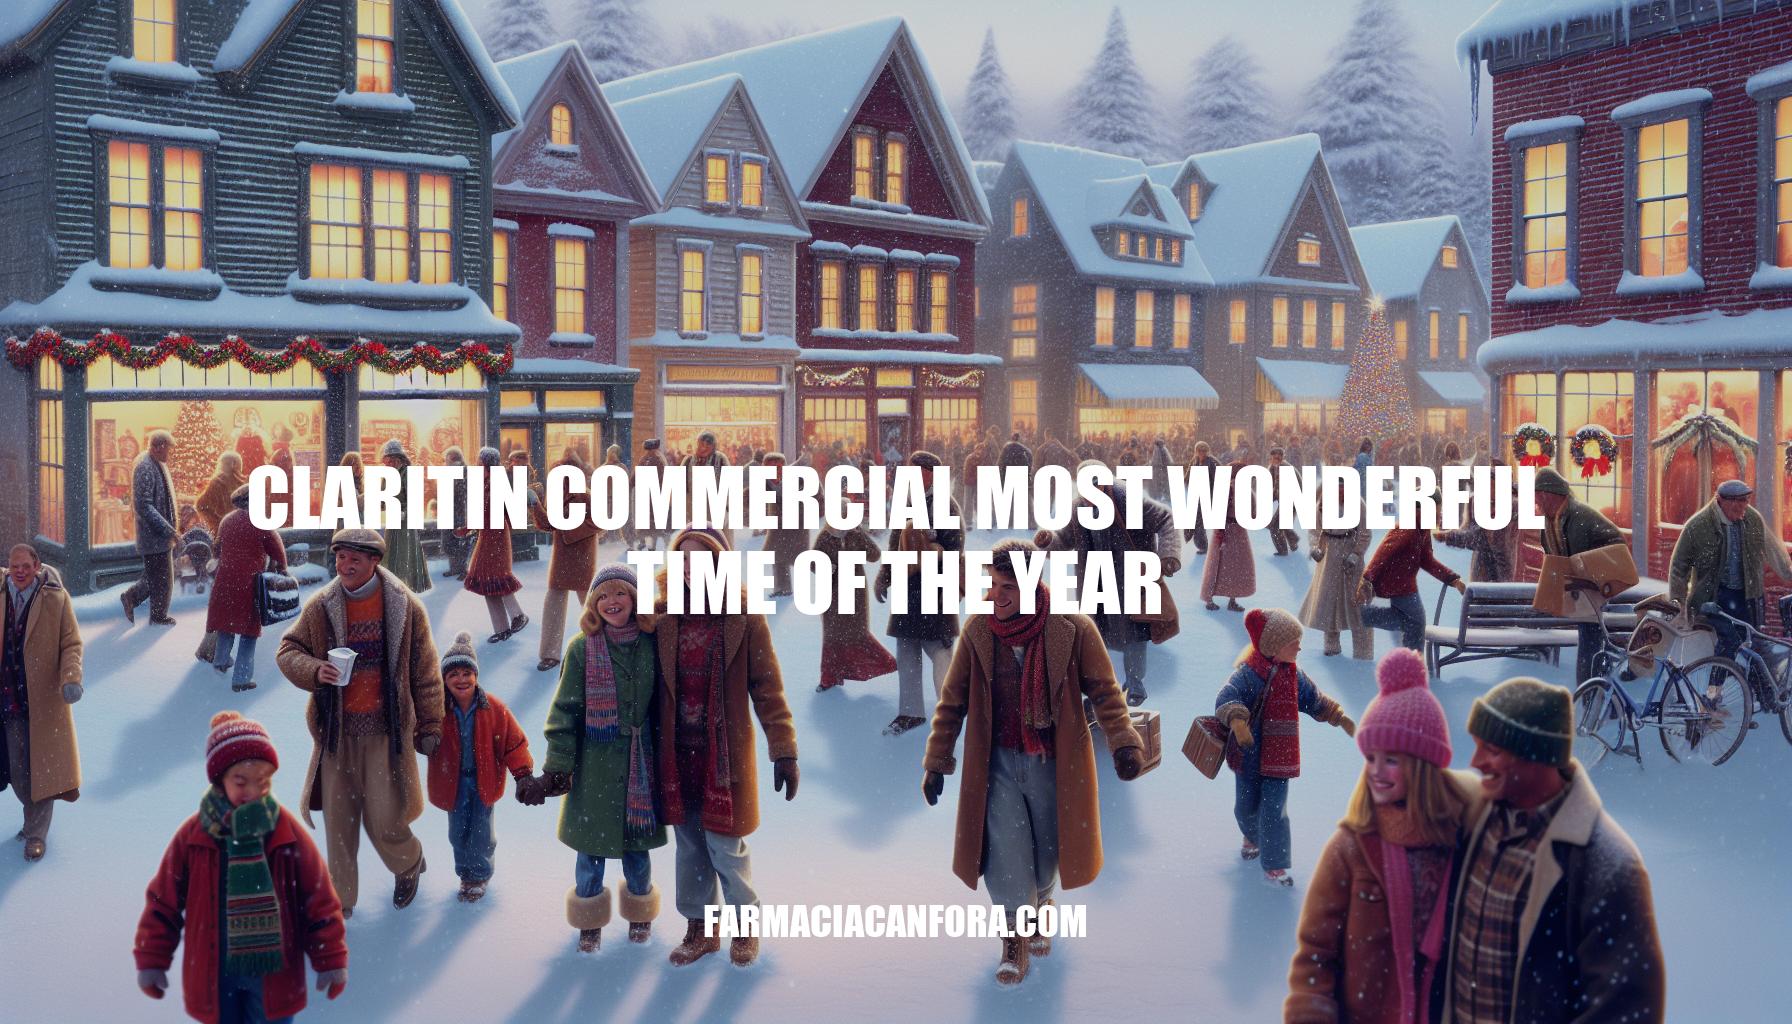 Claritin Commercial: Most Wonderful Time of the Year